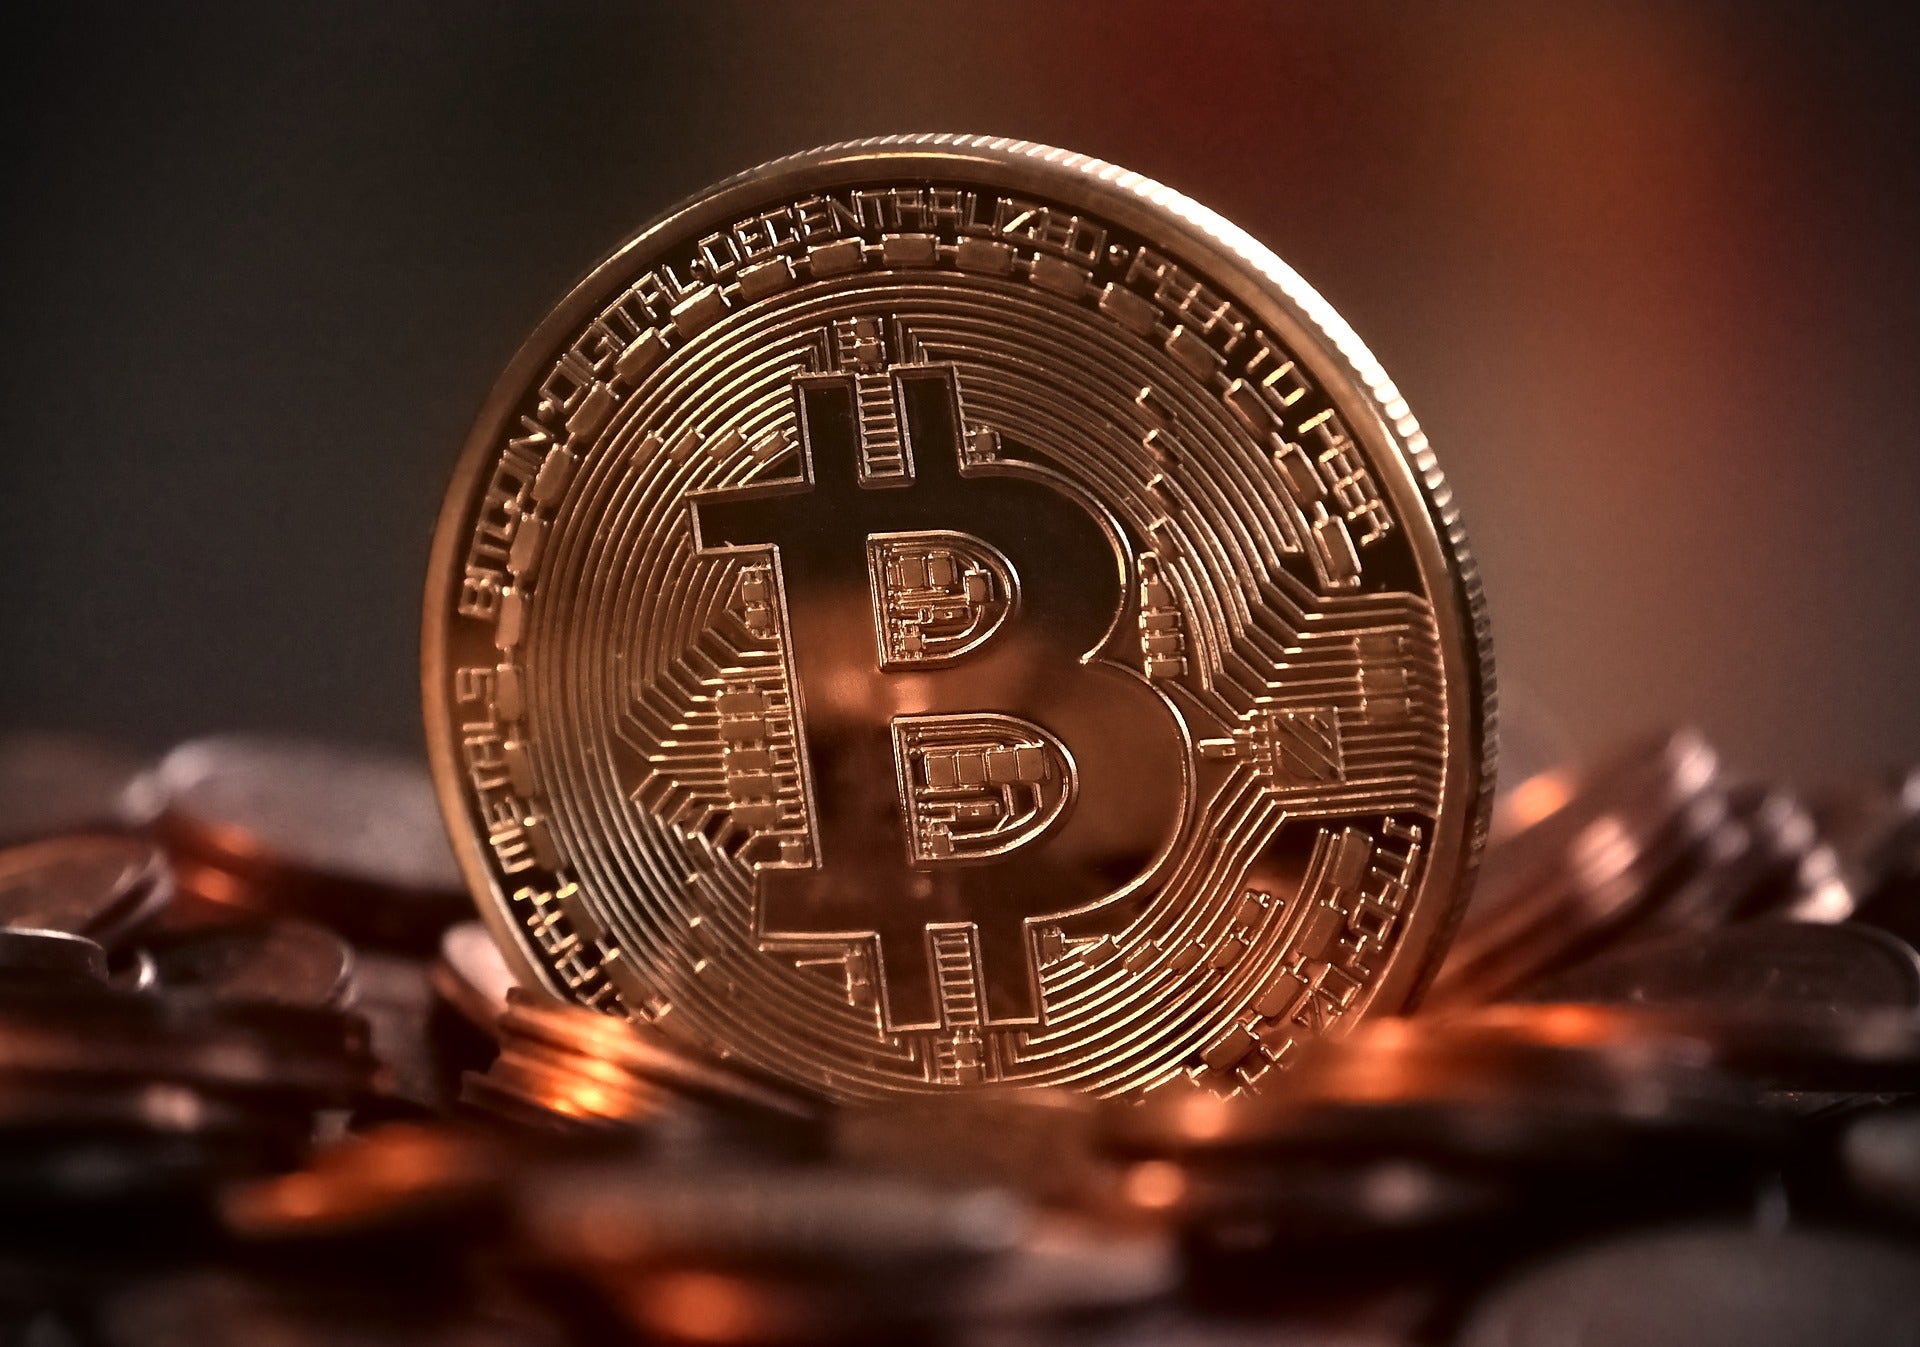 A Few Key Factors That Could Predict A Bitcoin Price Surge To End 2020